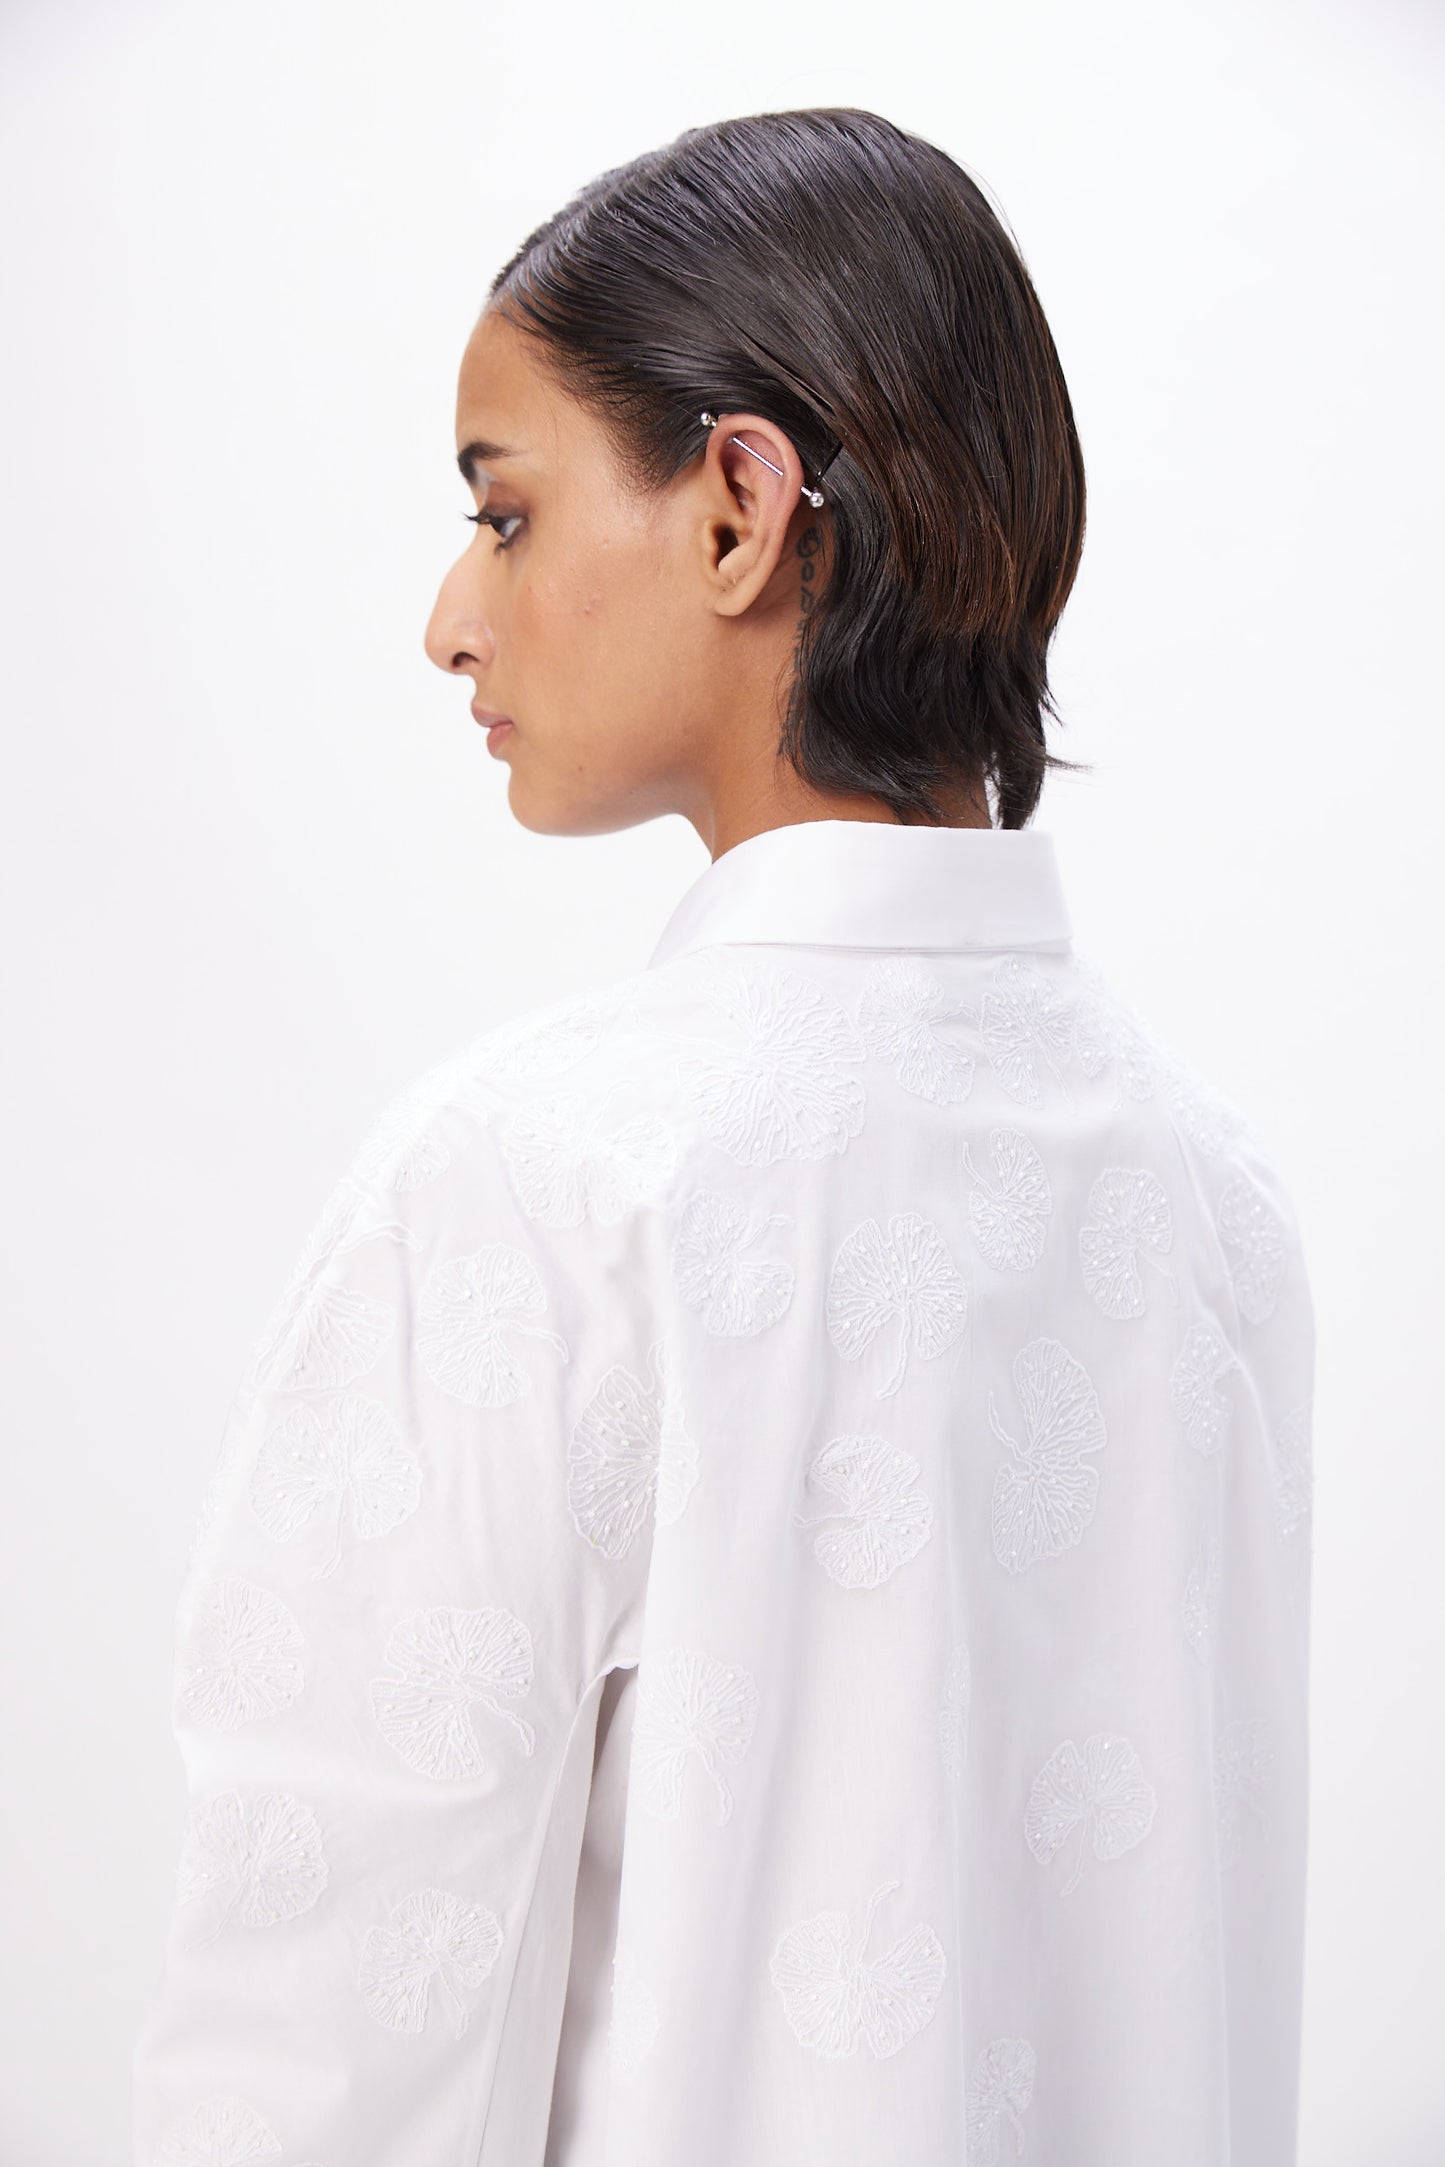 Straight Fit Shirt with Soft Rounded Sleeves